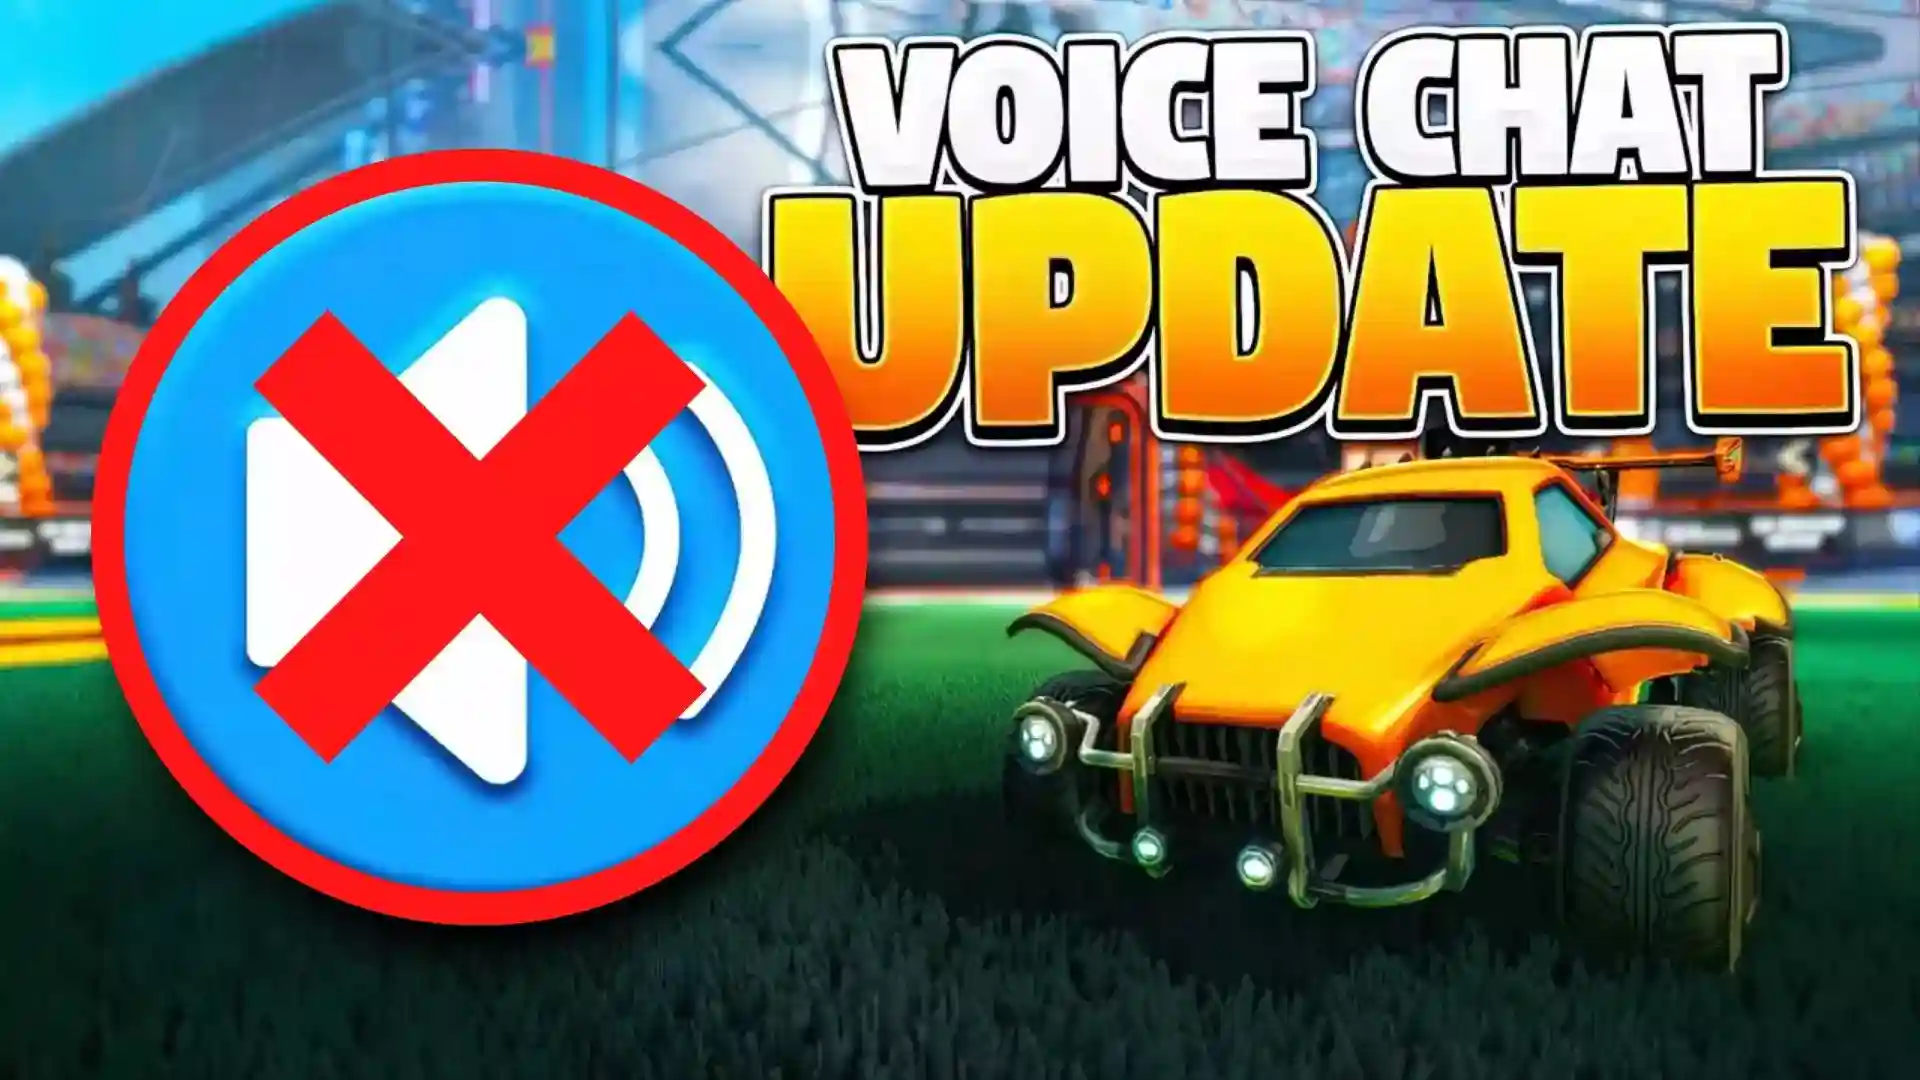 how to turn off voice chat in rocket league 2022